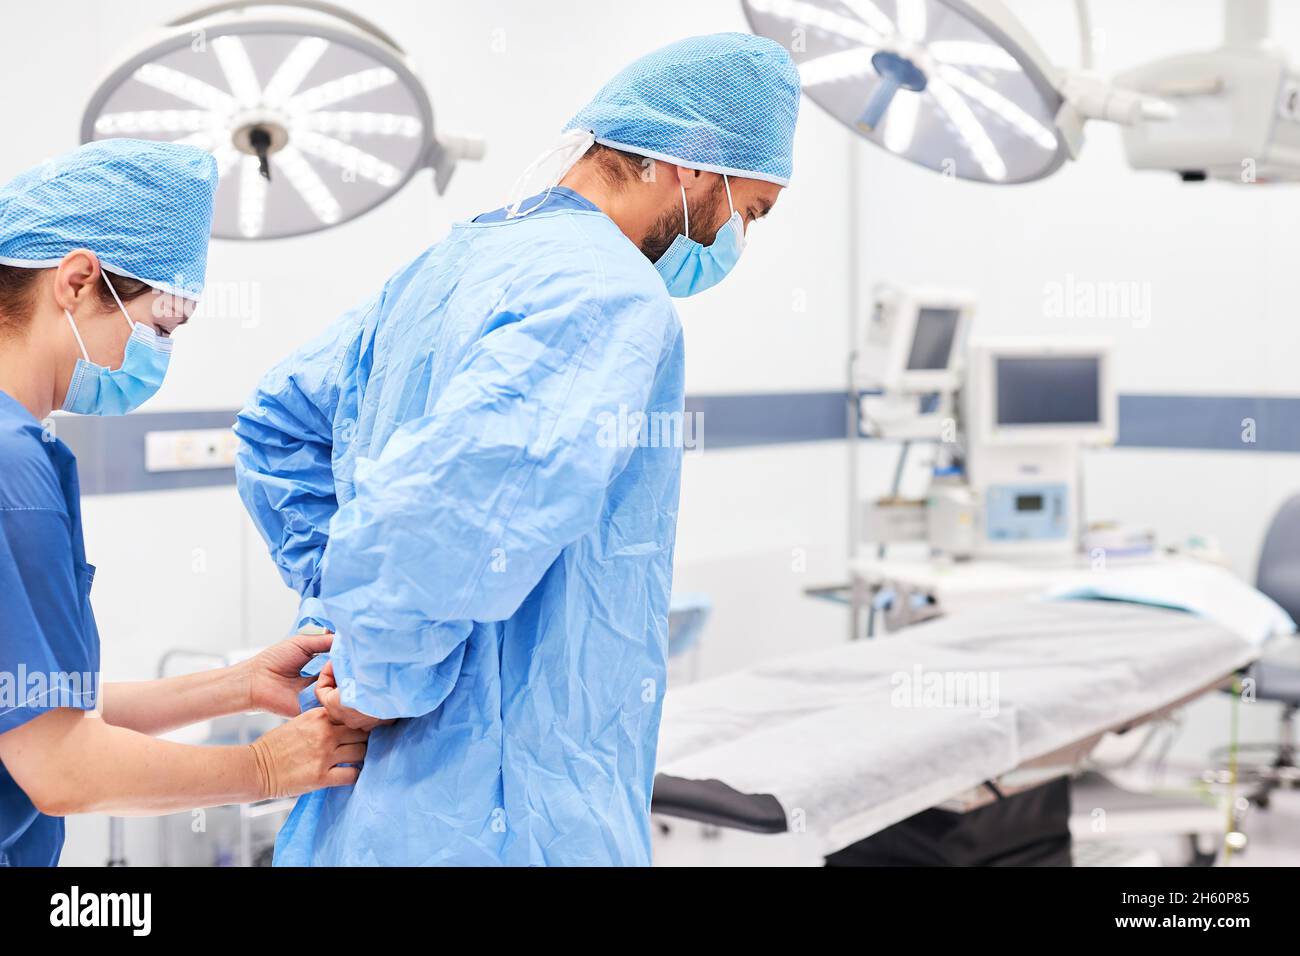 Nurse helps surgeon with face mask put on gown before surgery Stock Photo